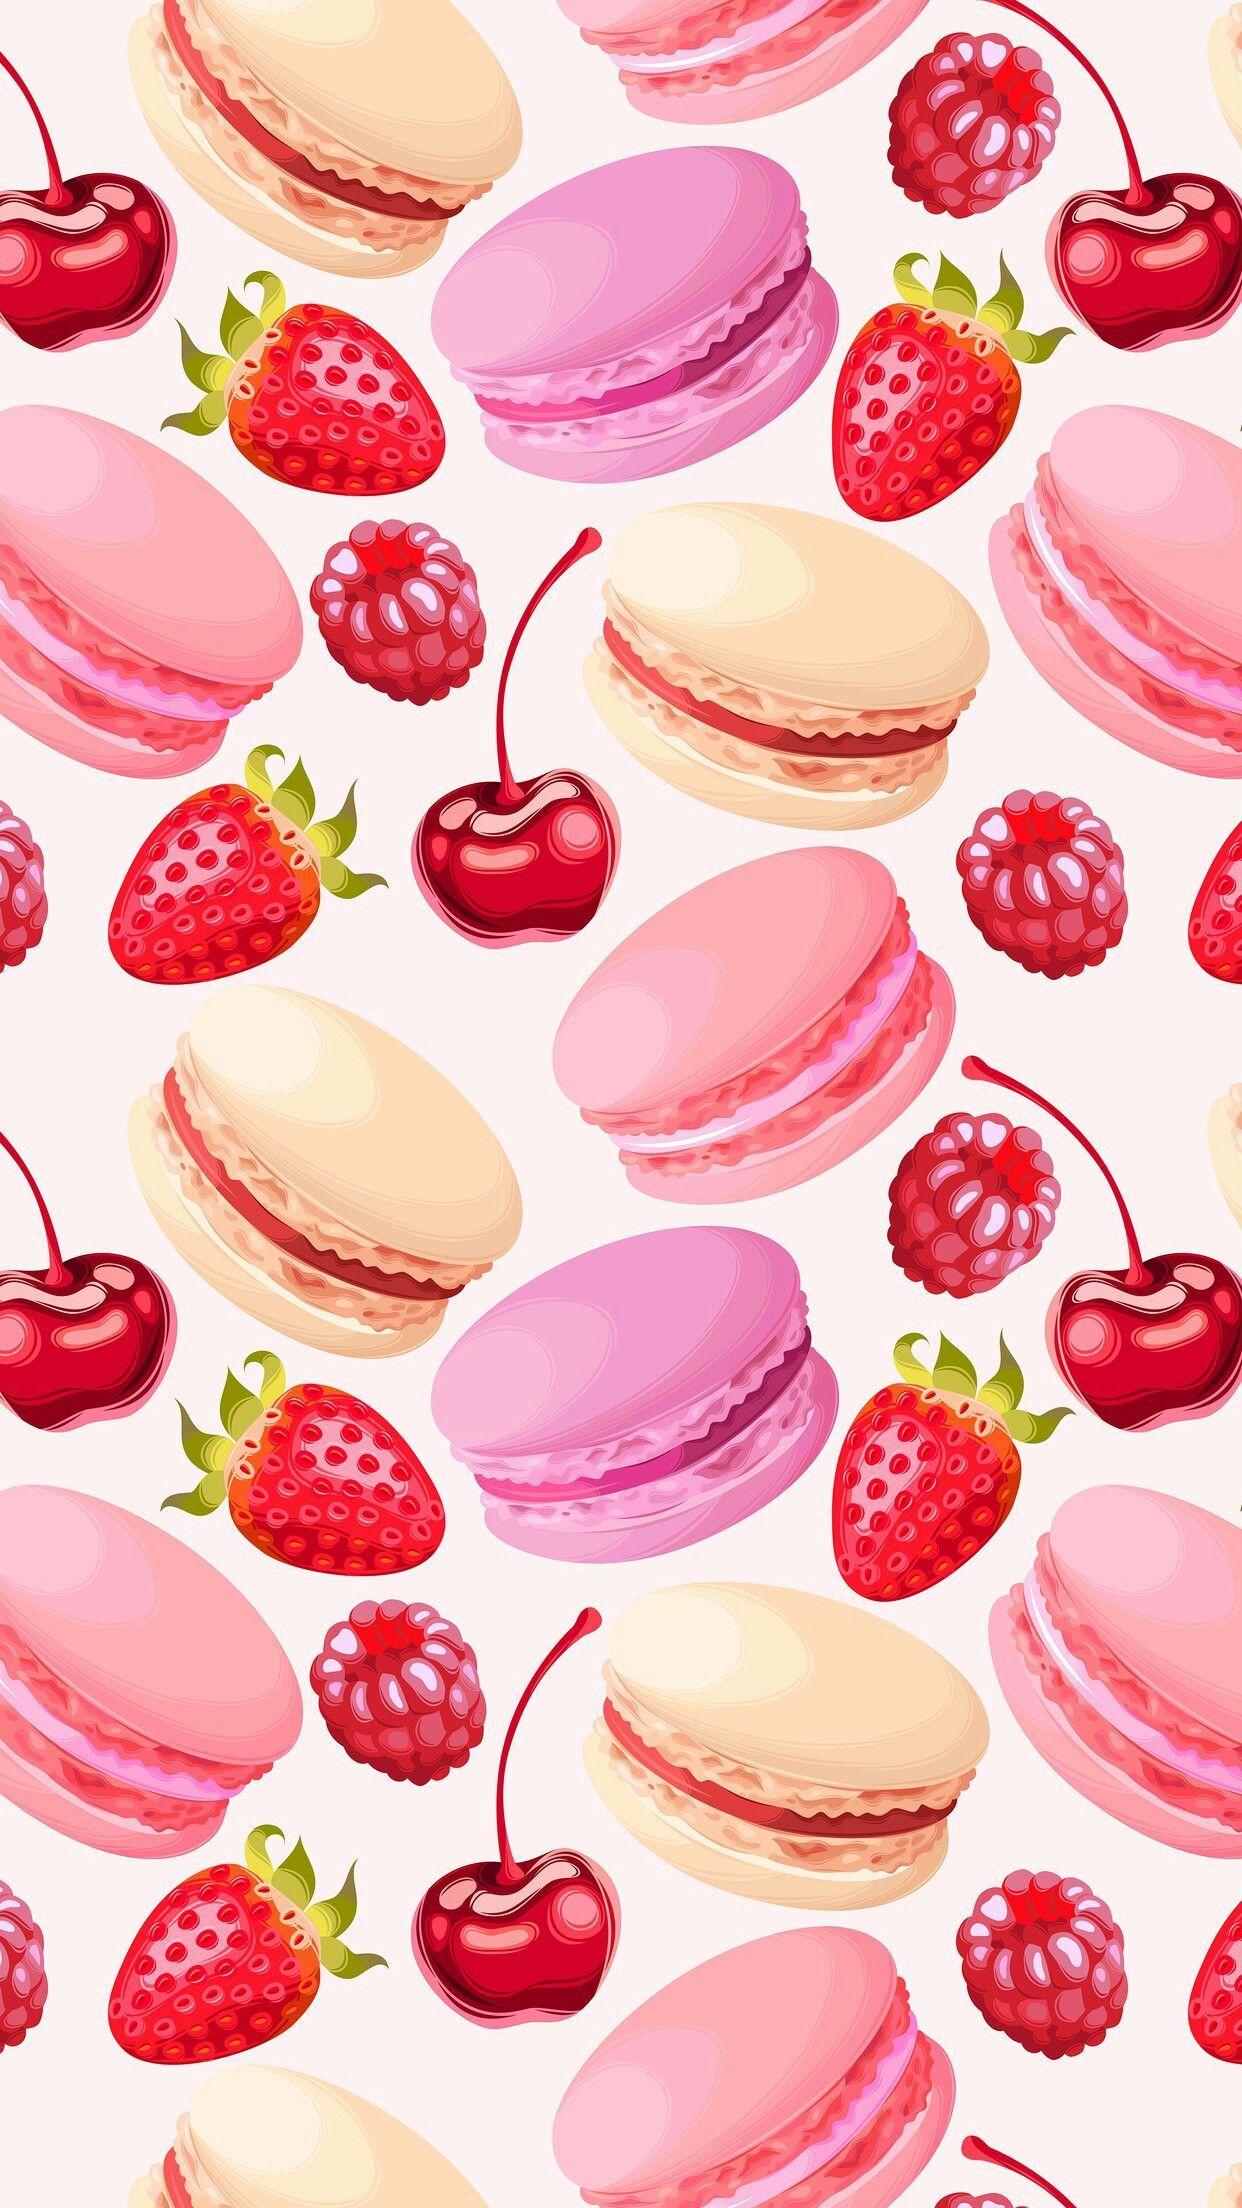 Cute Girly Macaroon Wallpaper for iPhone Wallpaper HD. Macaroon wallpaper, Food wallpaper, iPhone wallpaper girly